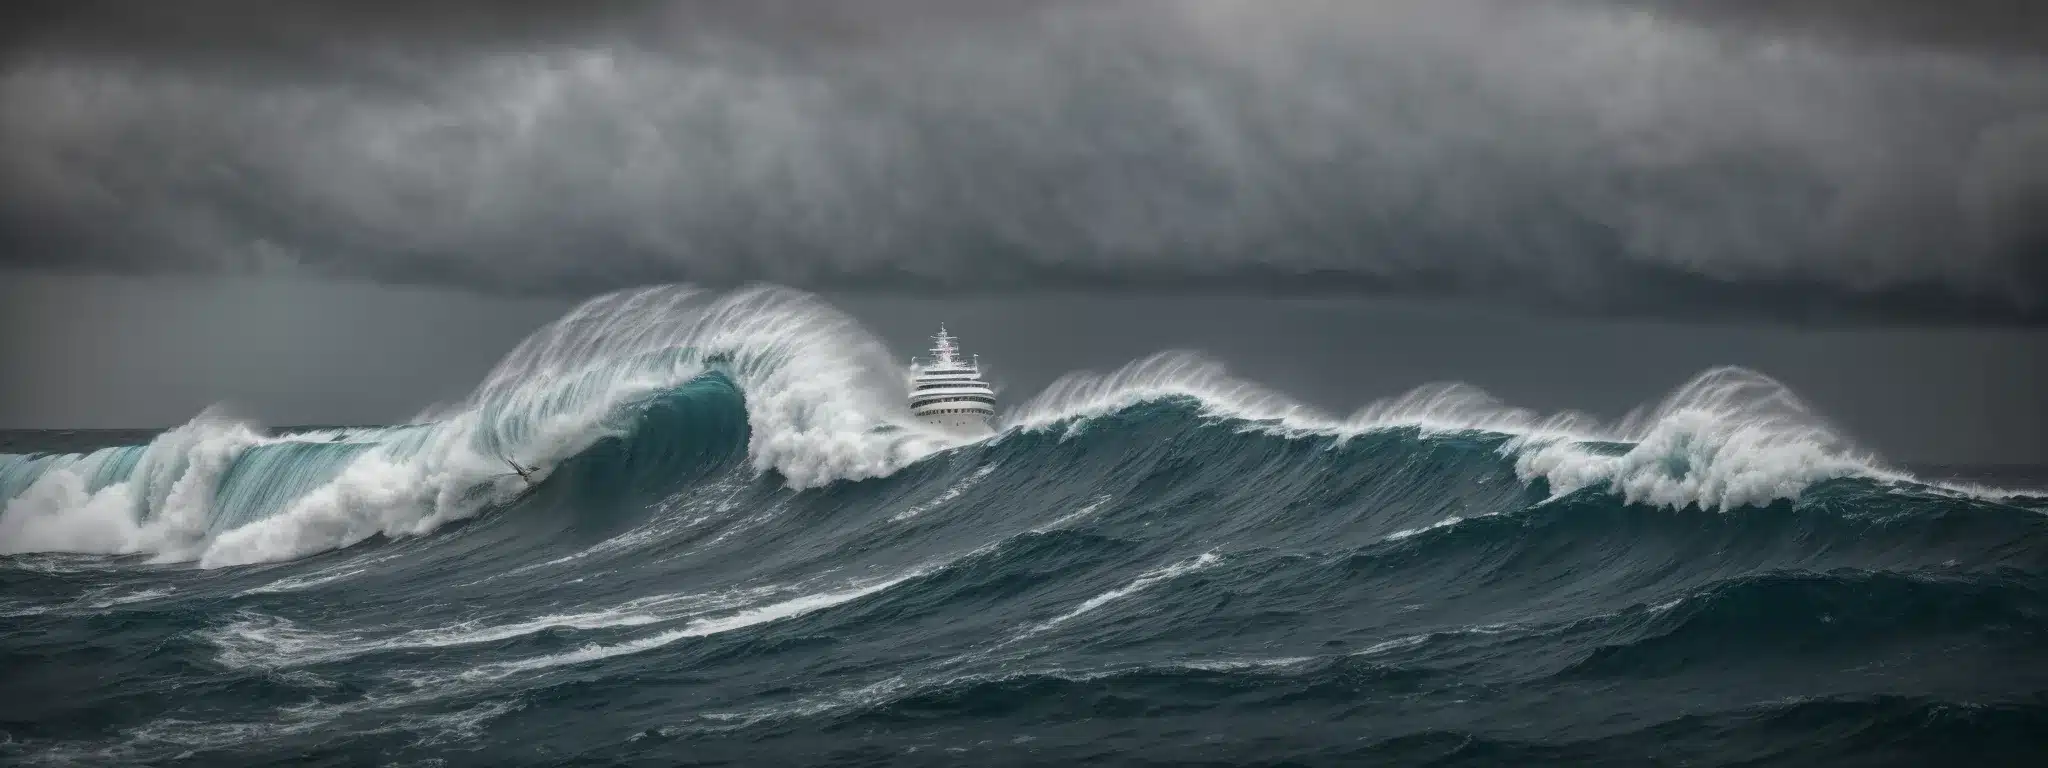 A Ship Cutting Through Tumultuous Ocean Waves Under A Stormy Sky.